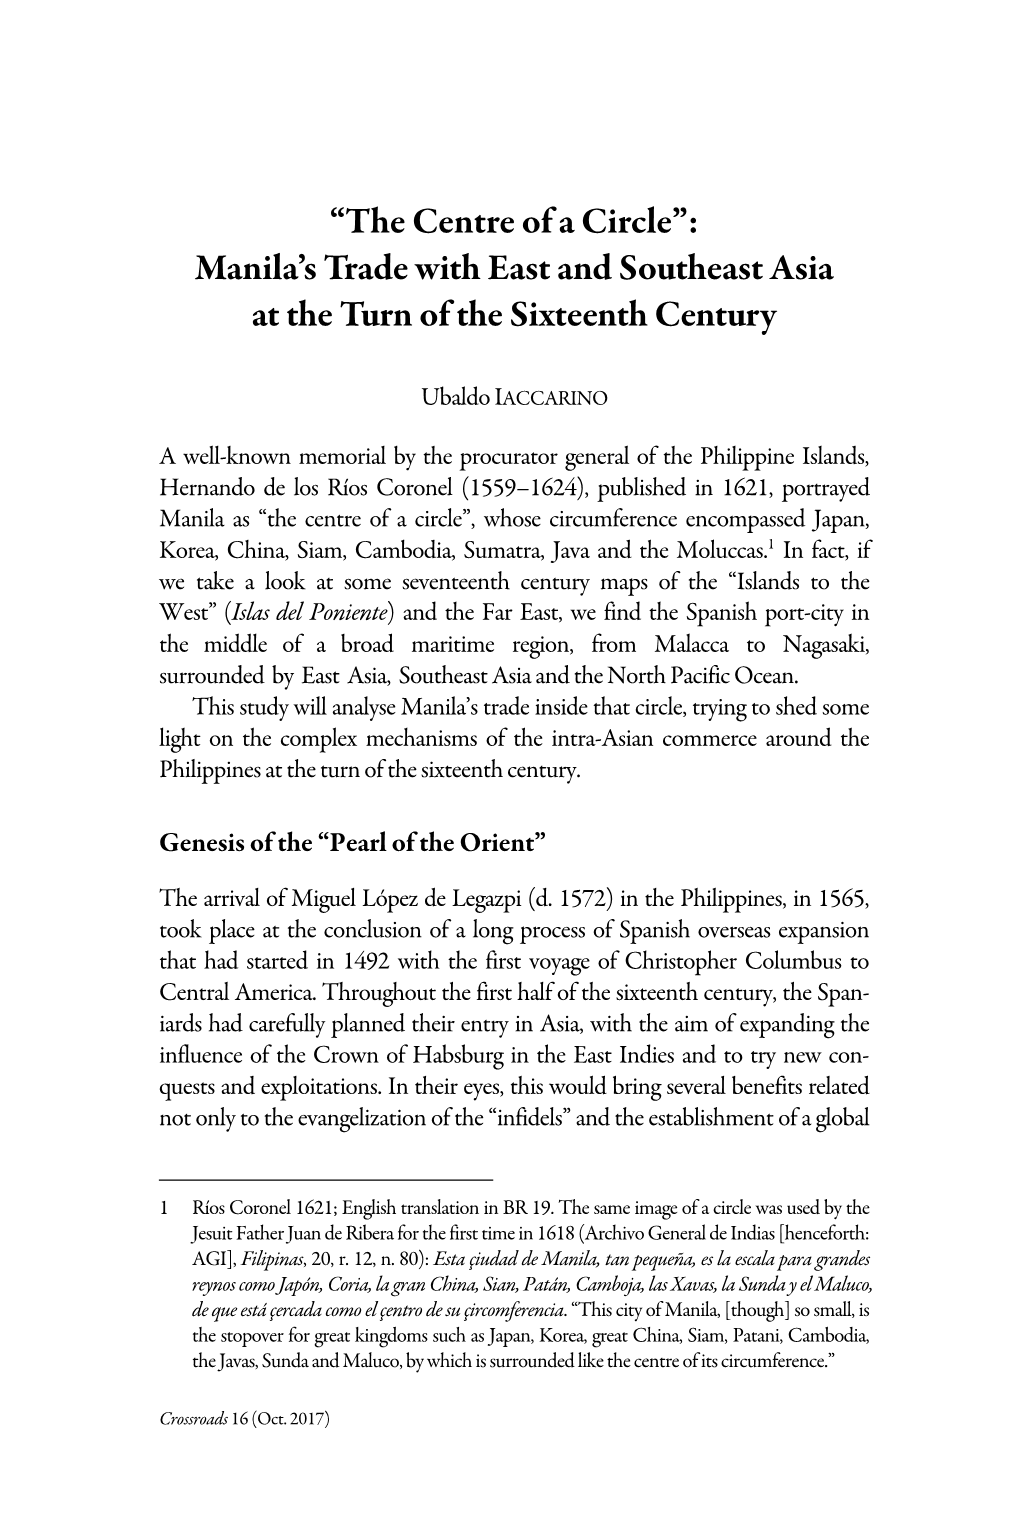 “The Centre of a Circle”: Manila's Trade with East and Southeast Asia